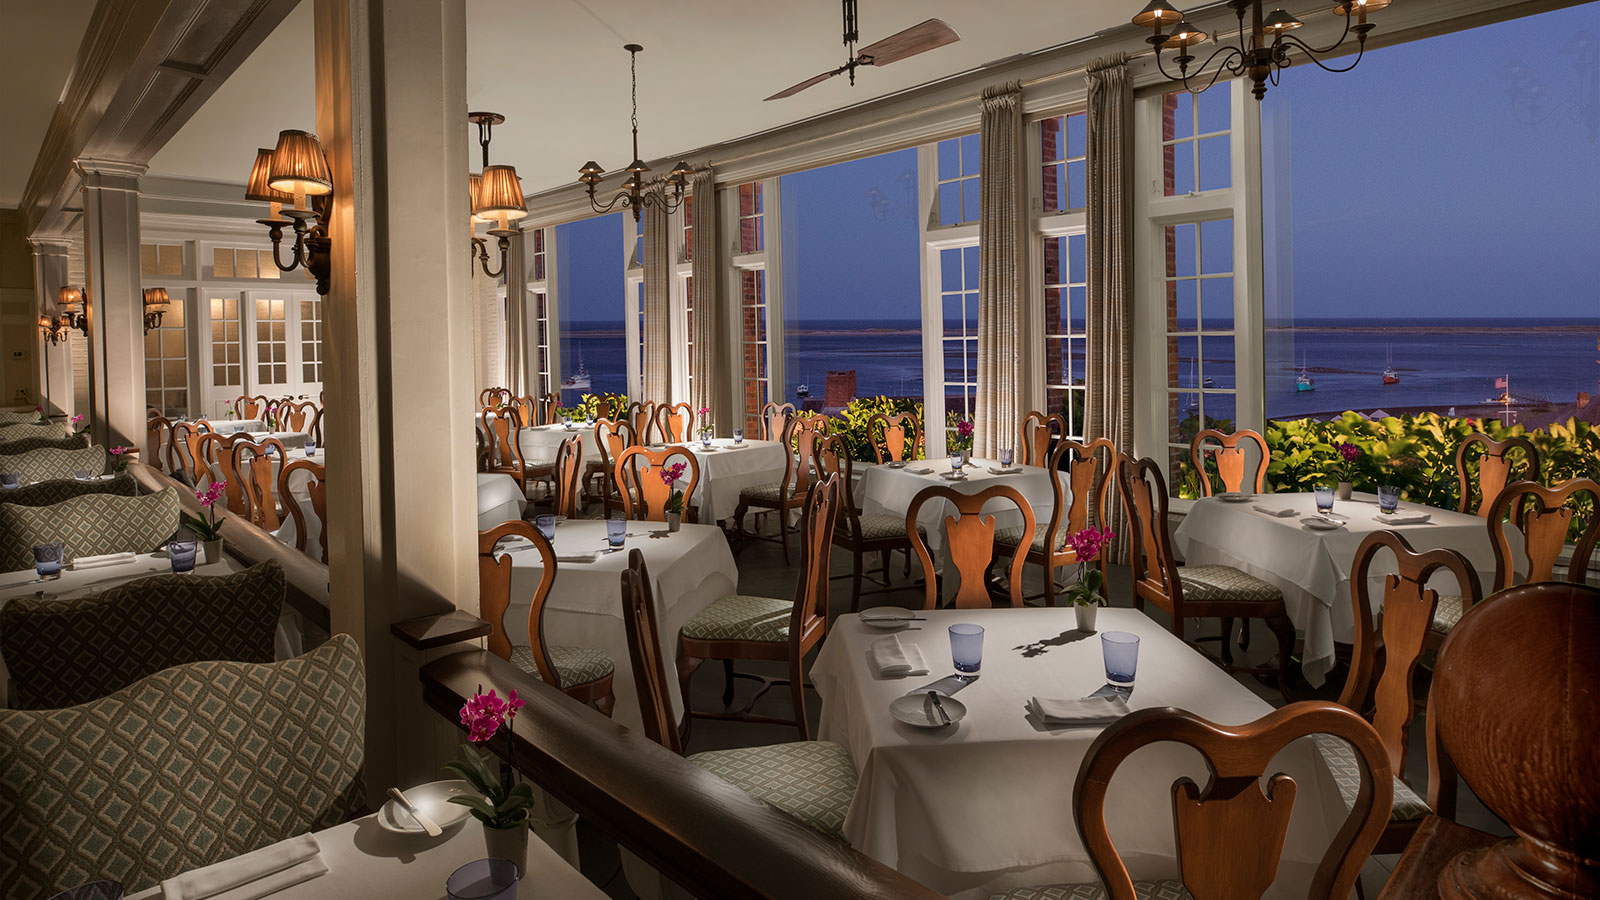 Taste classic, regionally-inspired seafood while staying at the Chatham Bars Inn.